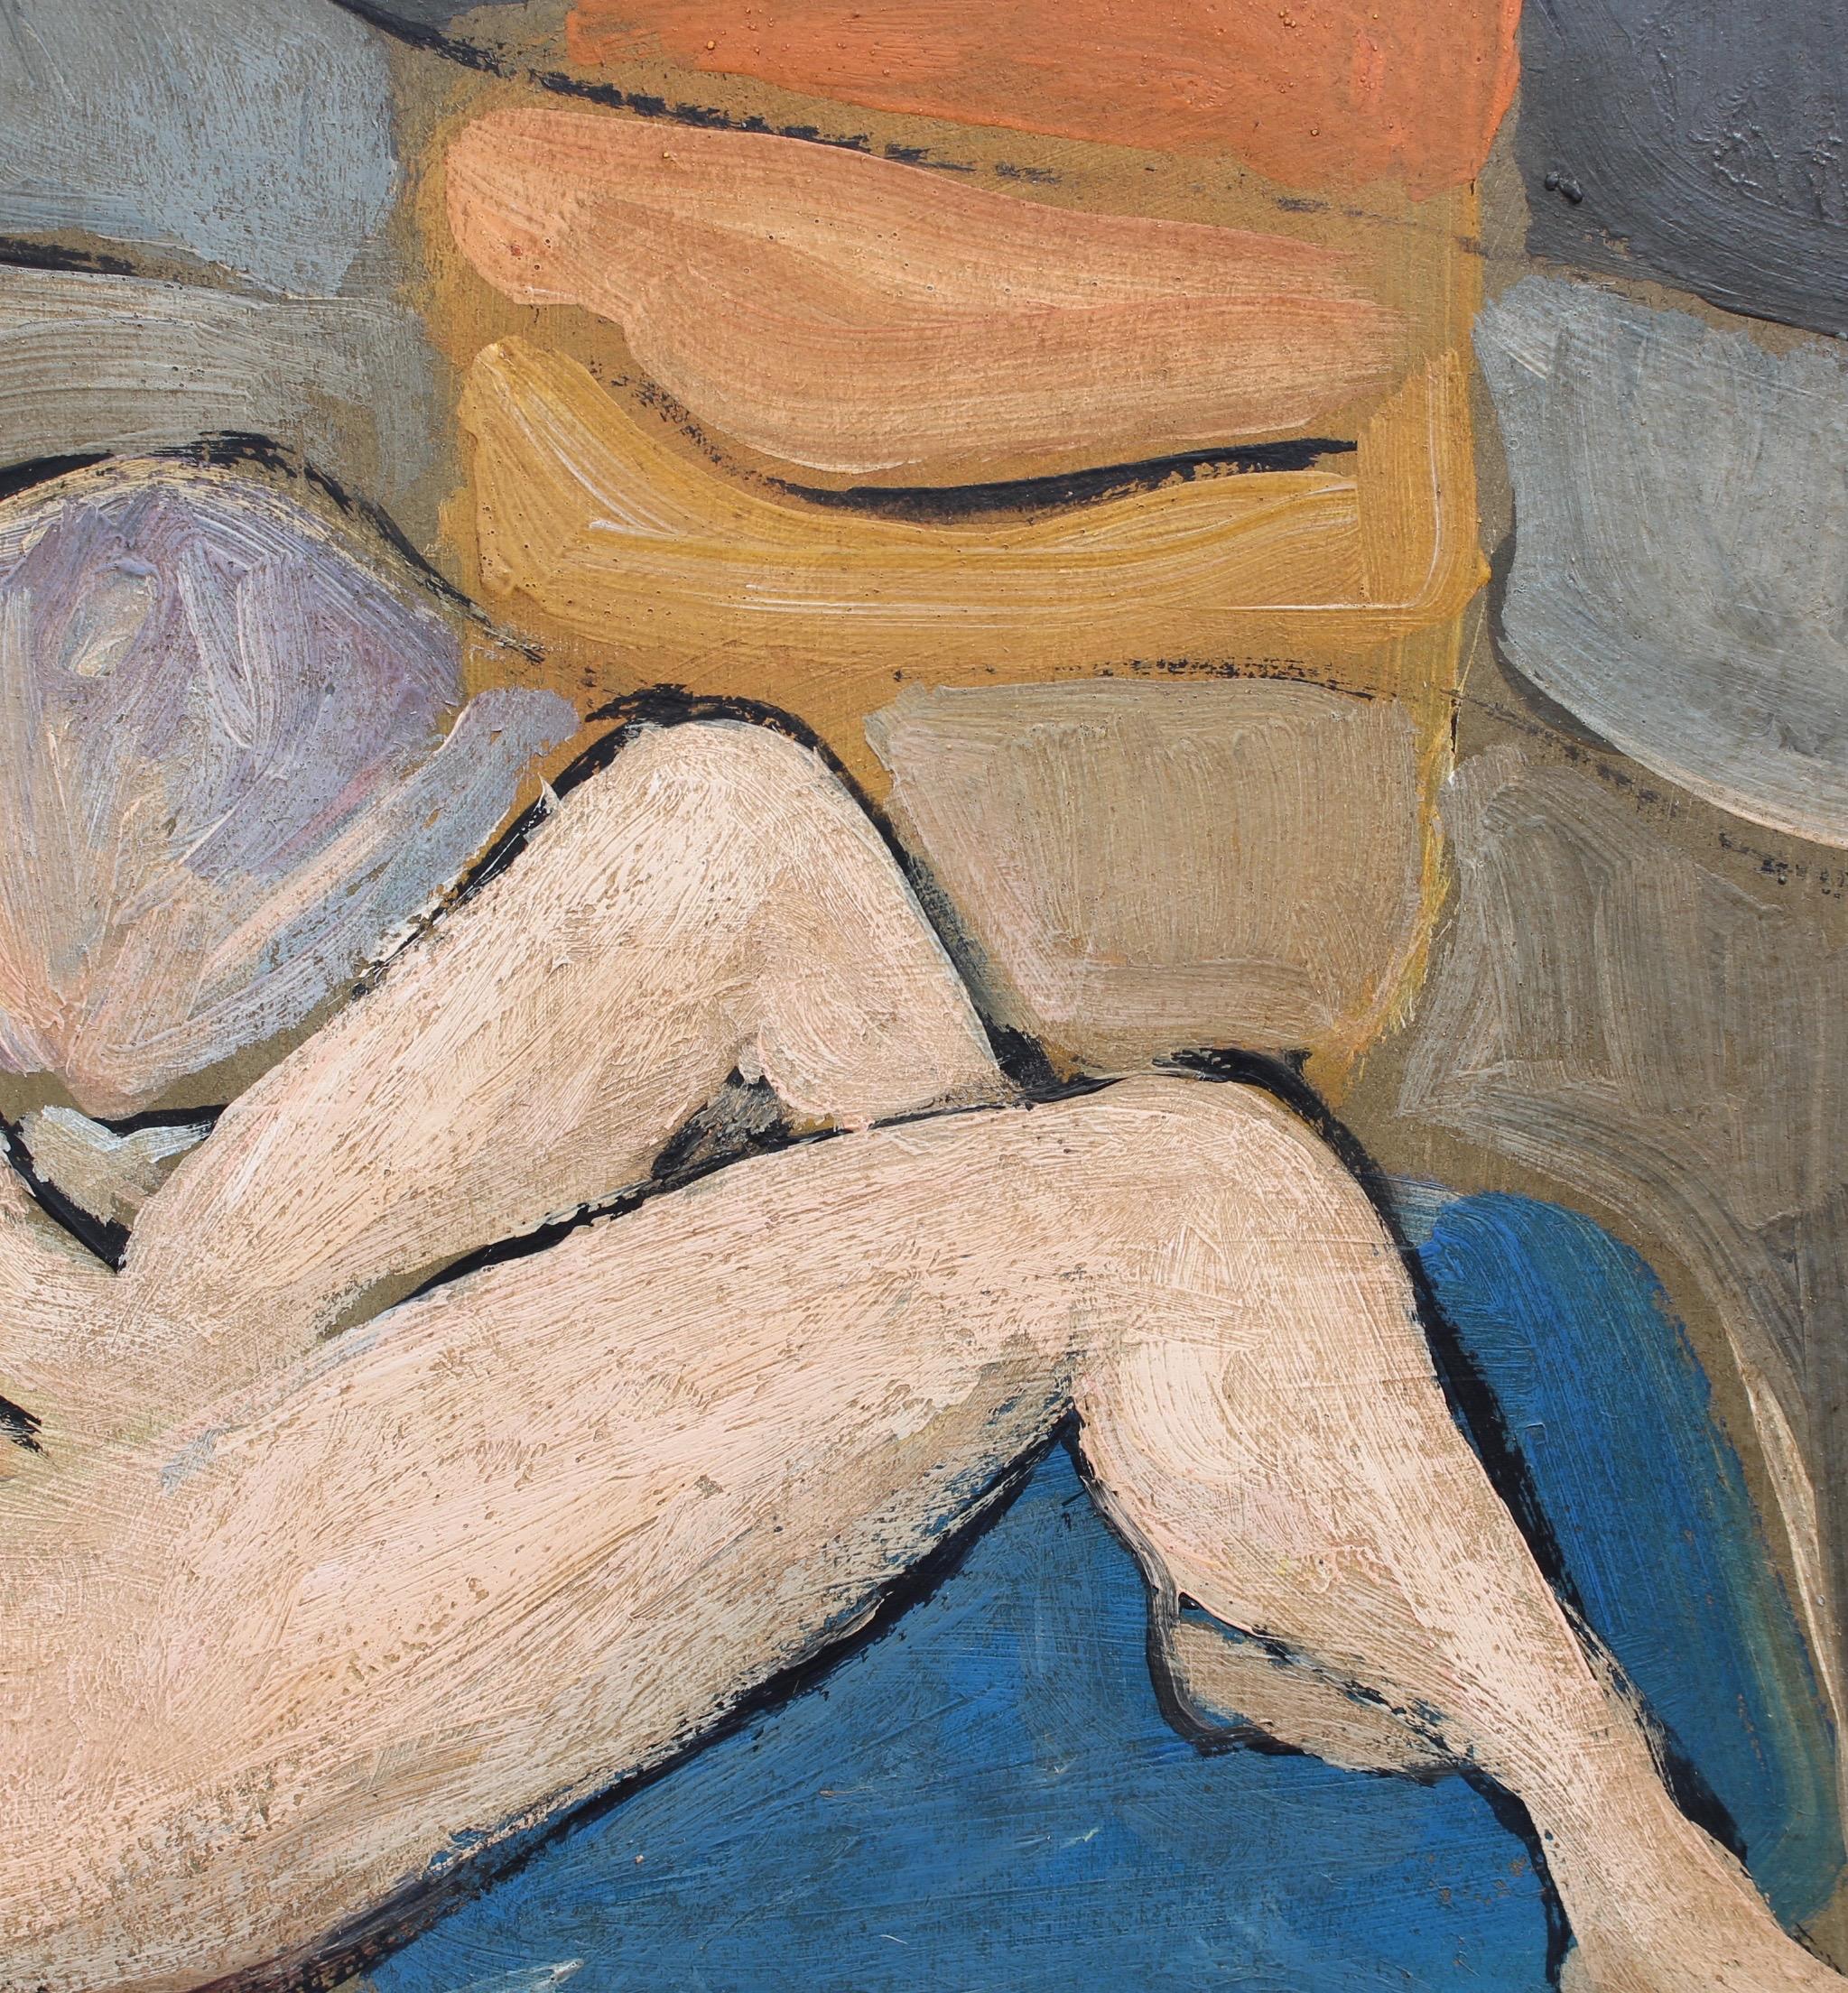 'Reclining Nude in Colour', oil on board, by artist with the initials 'R.M.' (circa 1940s - 1960s). The age-old artistic tradition of the reclining nude goes back hundreds of years and includes some of the best-known works from art history. The